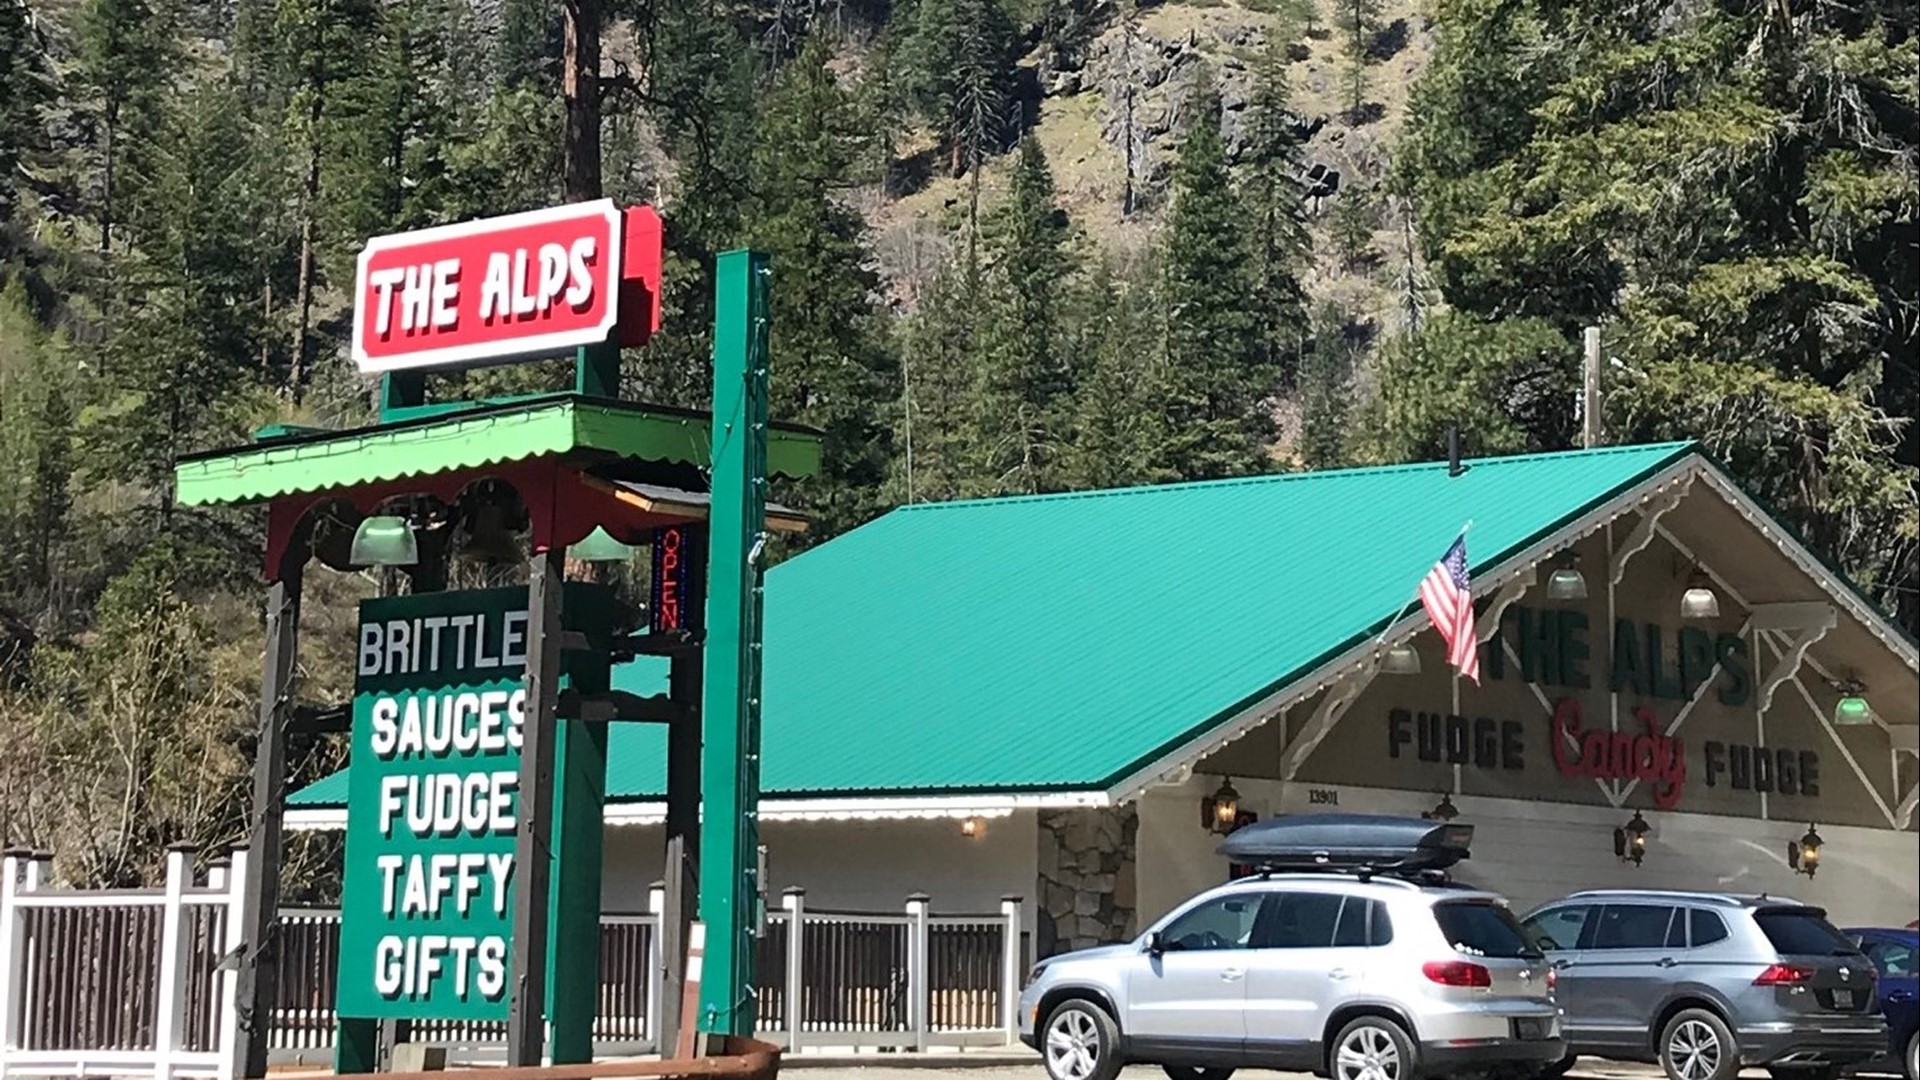 You know you've always wanted to stop at this place - here's why you should. The Alps won Best Treat Stop in 2019's BEST Northwest Escapes. #k5evening